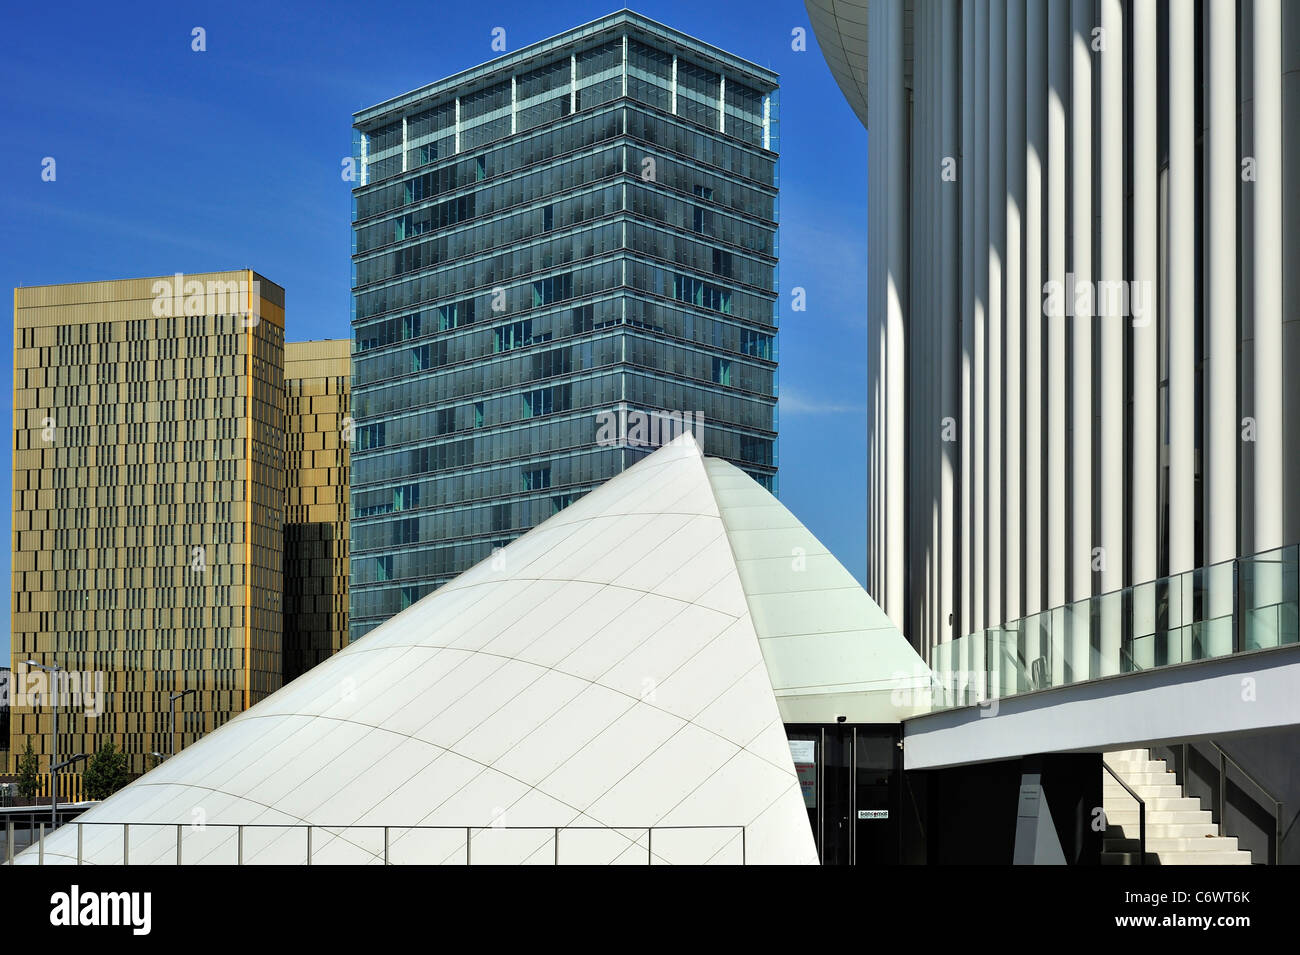 European Parliament, Court of Justice of the European Union and Concert Hall / Philharmonie Luxembourg at Kirchberg Stock Photo